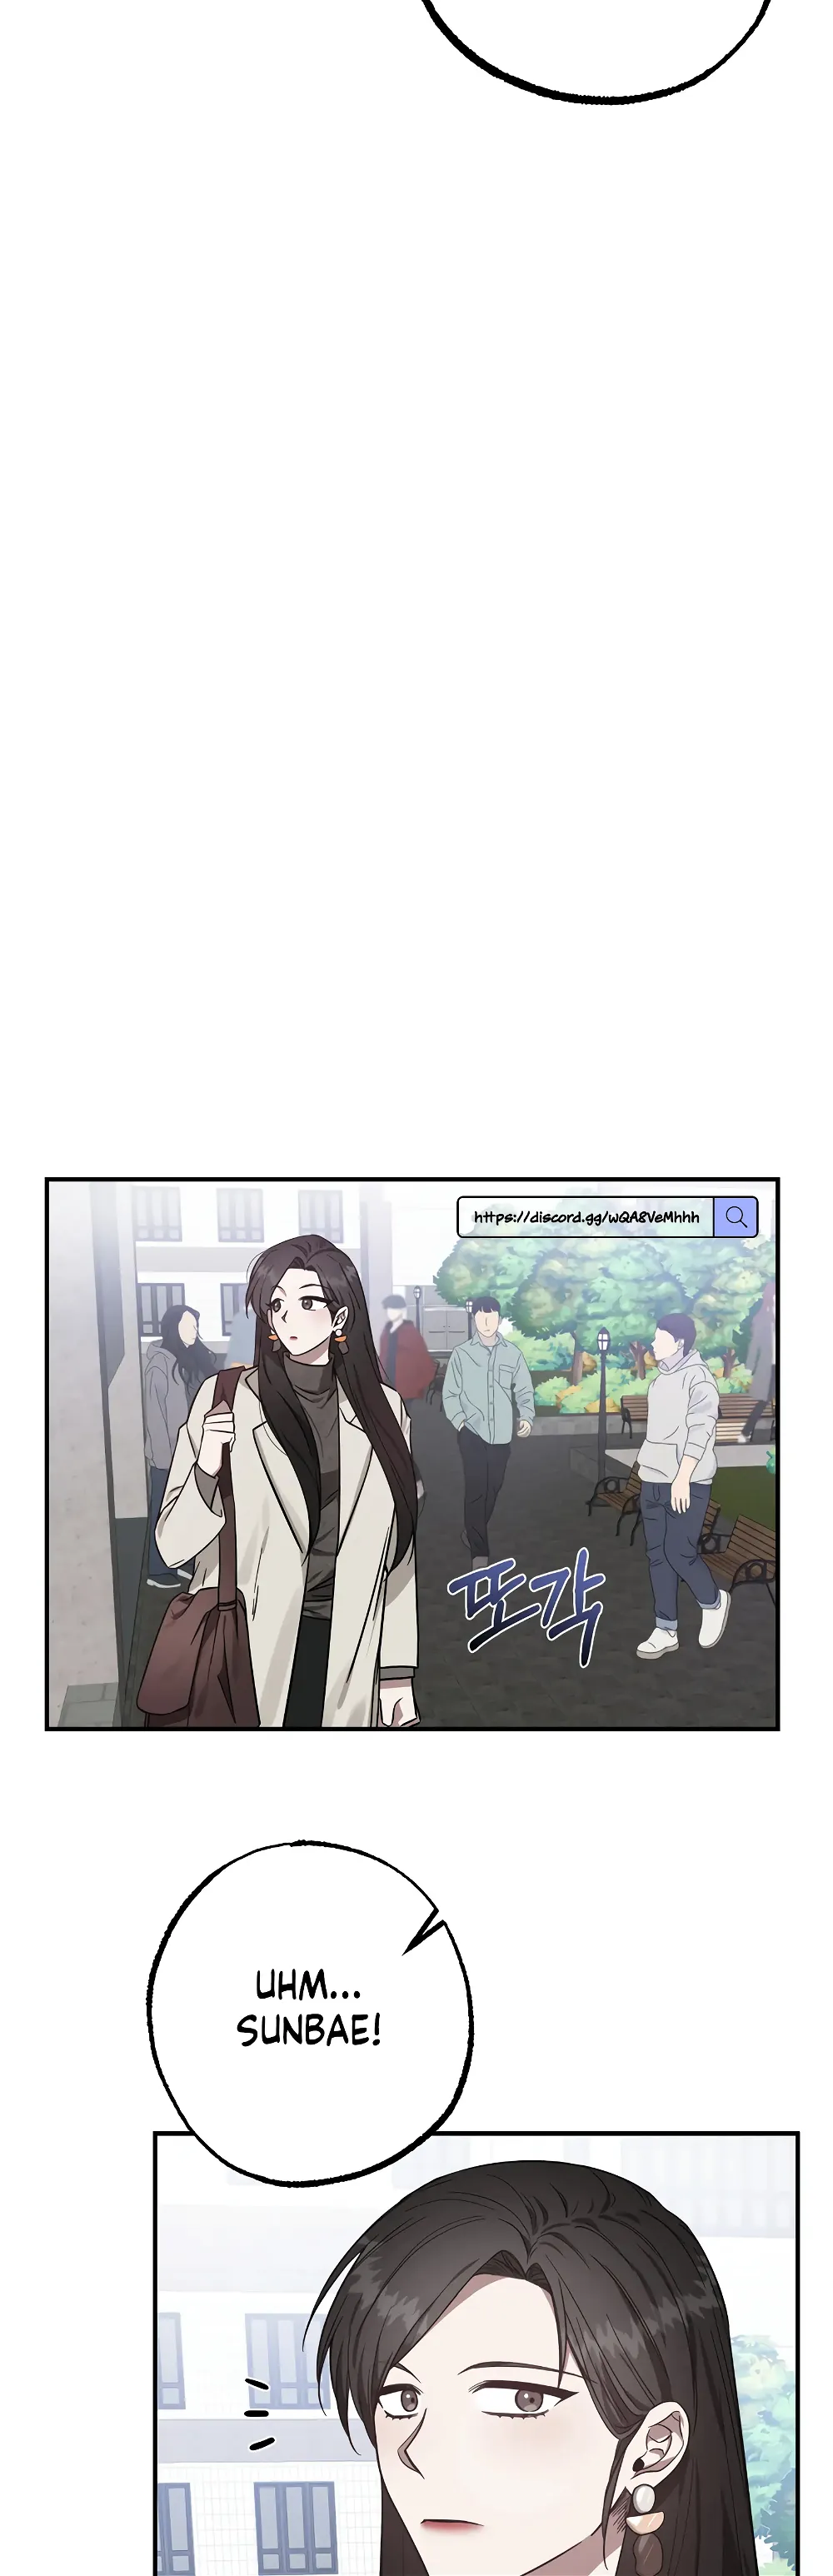 Mijeong’s Relationships chapter 3 - Page 35